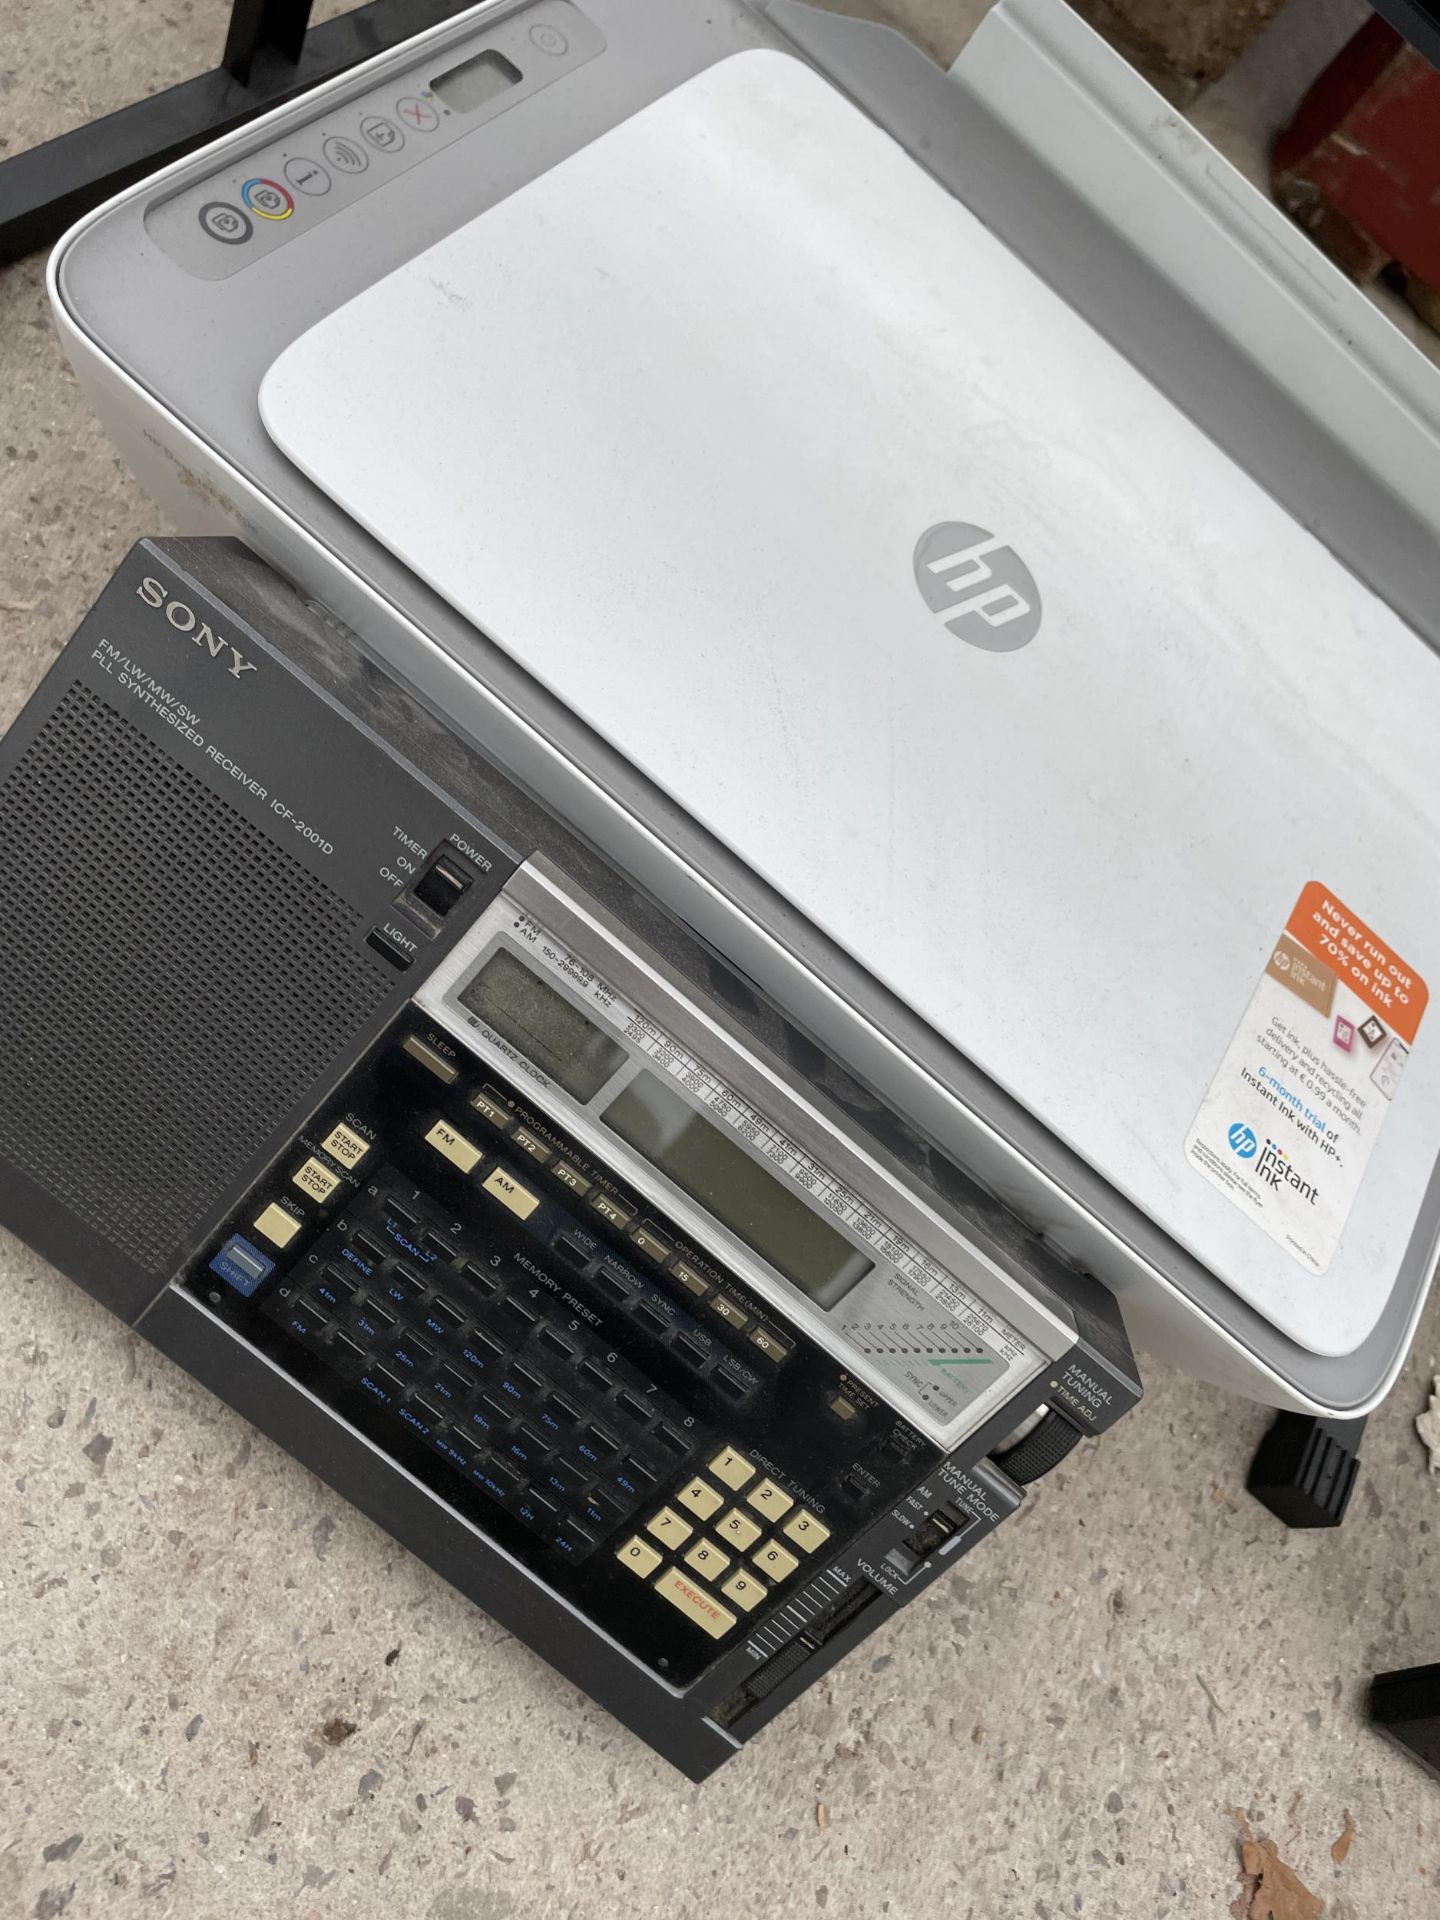 AN ELECTRIC KEYBOARD, A HP PRINTER AND A SONY RADIO - Image 2 of 2